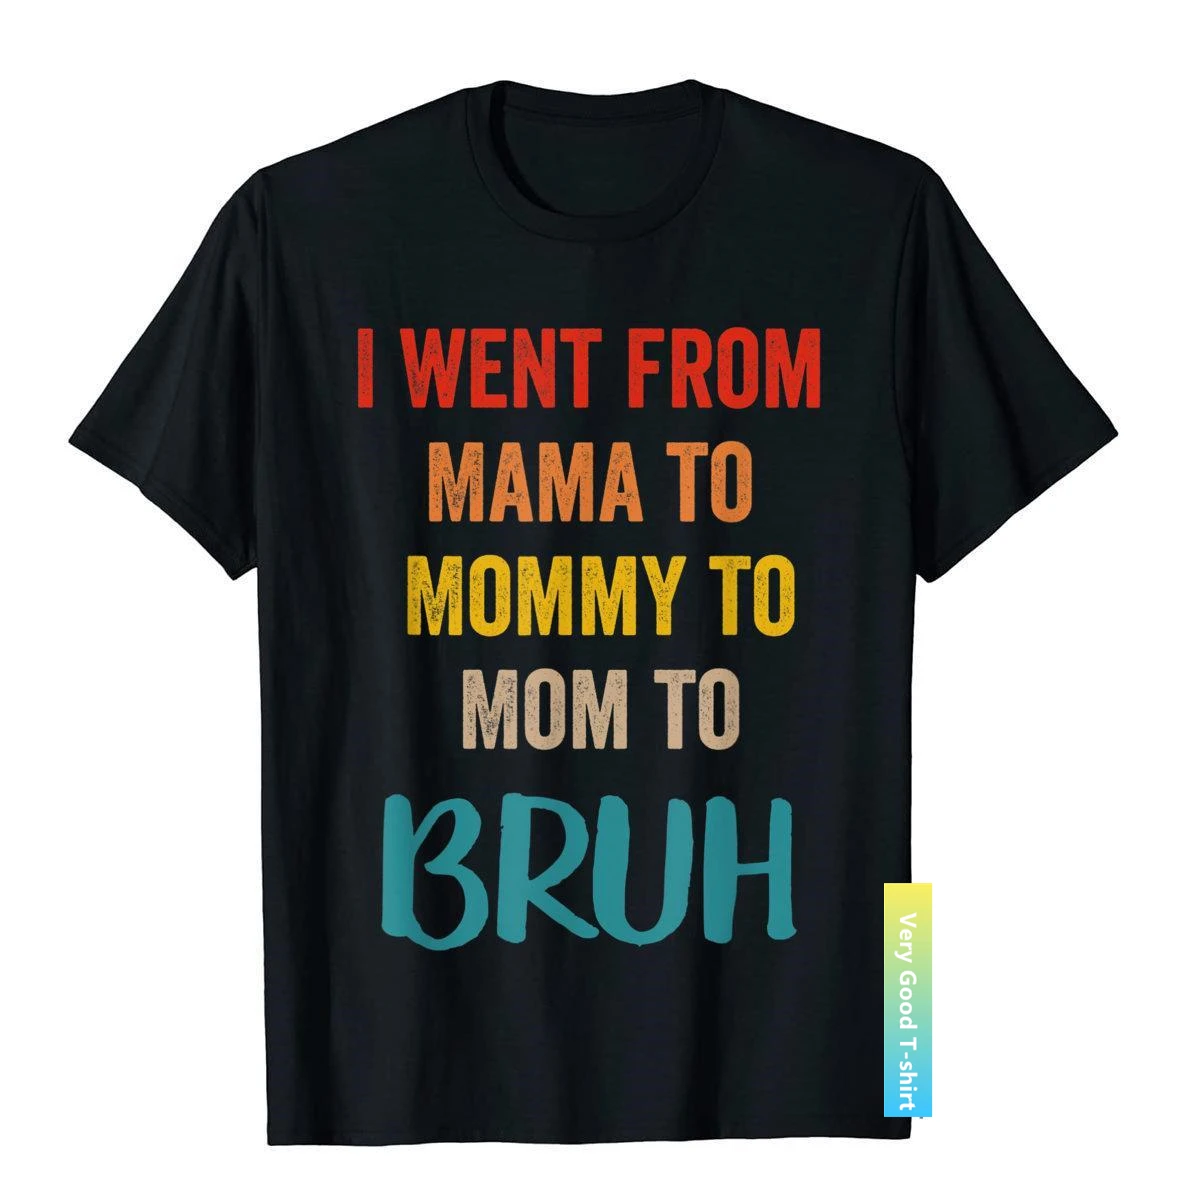 

I Went From Mama To Mommy To Mom To Bruh Funny Gift T-Shirt T Shirt Tops Shirts Popular Cotton Novelty Men's